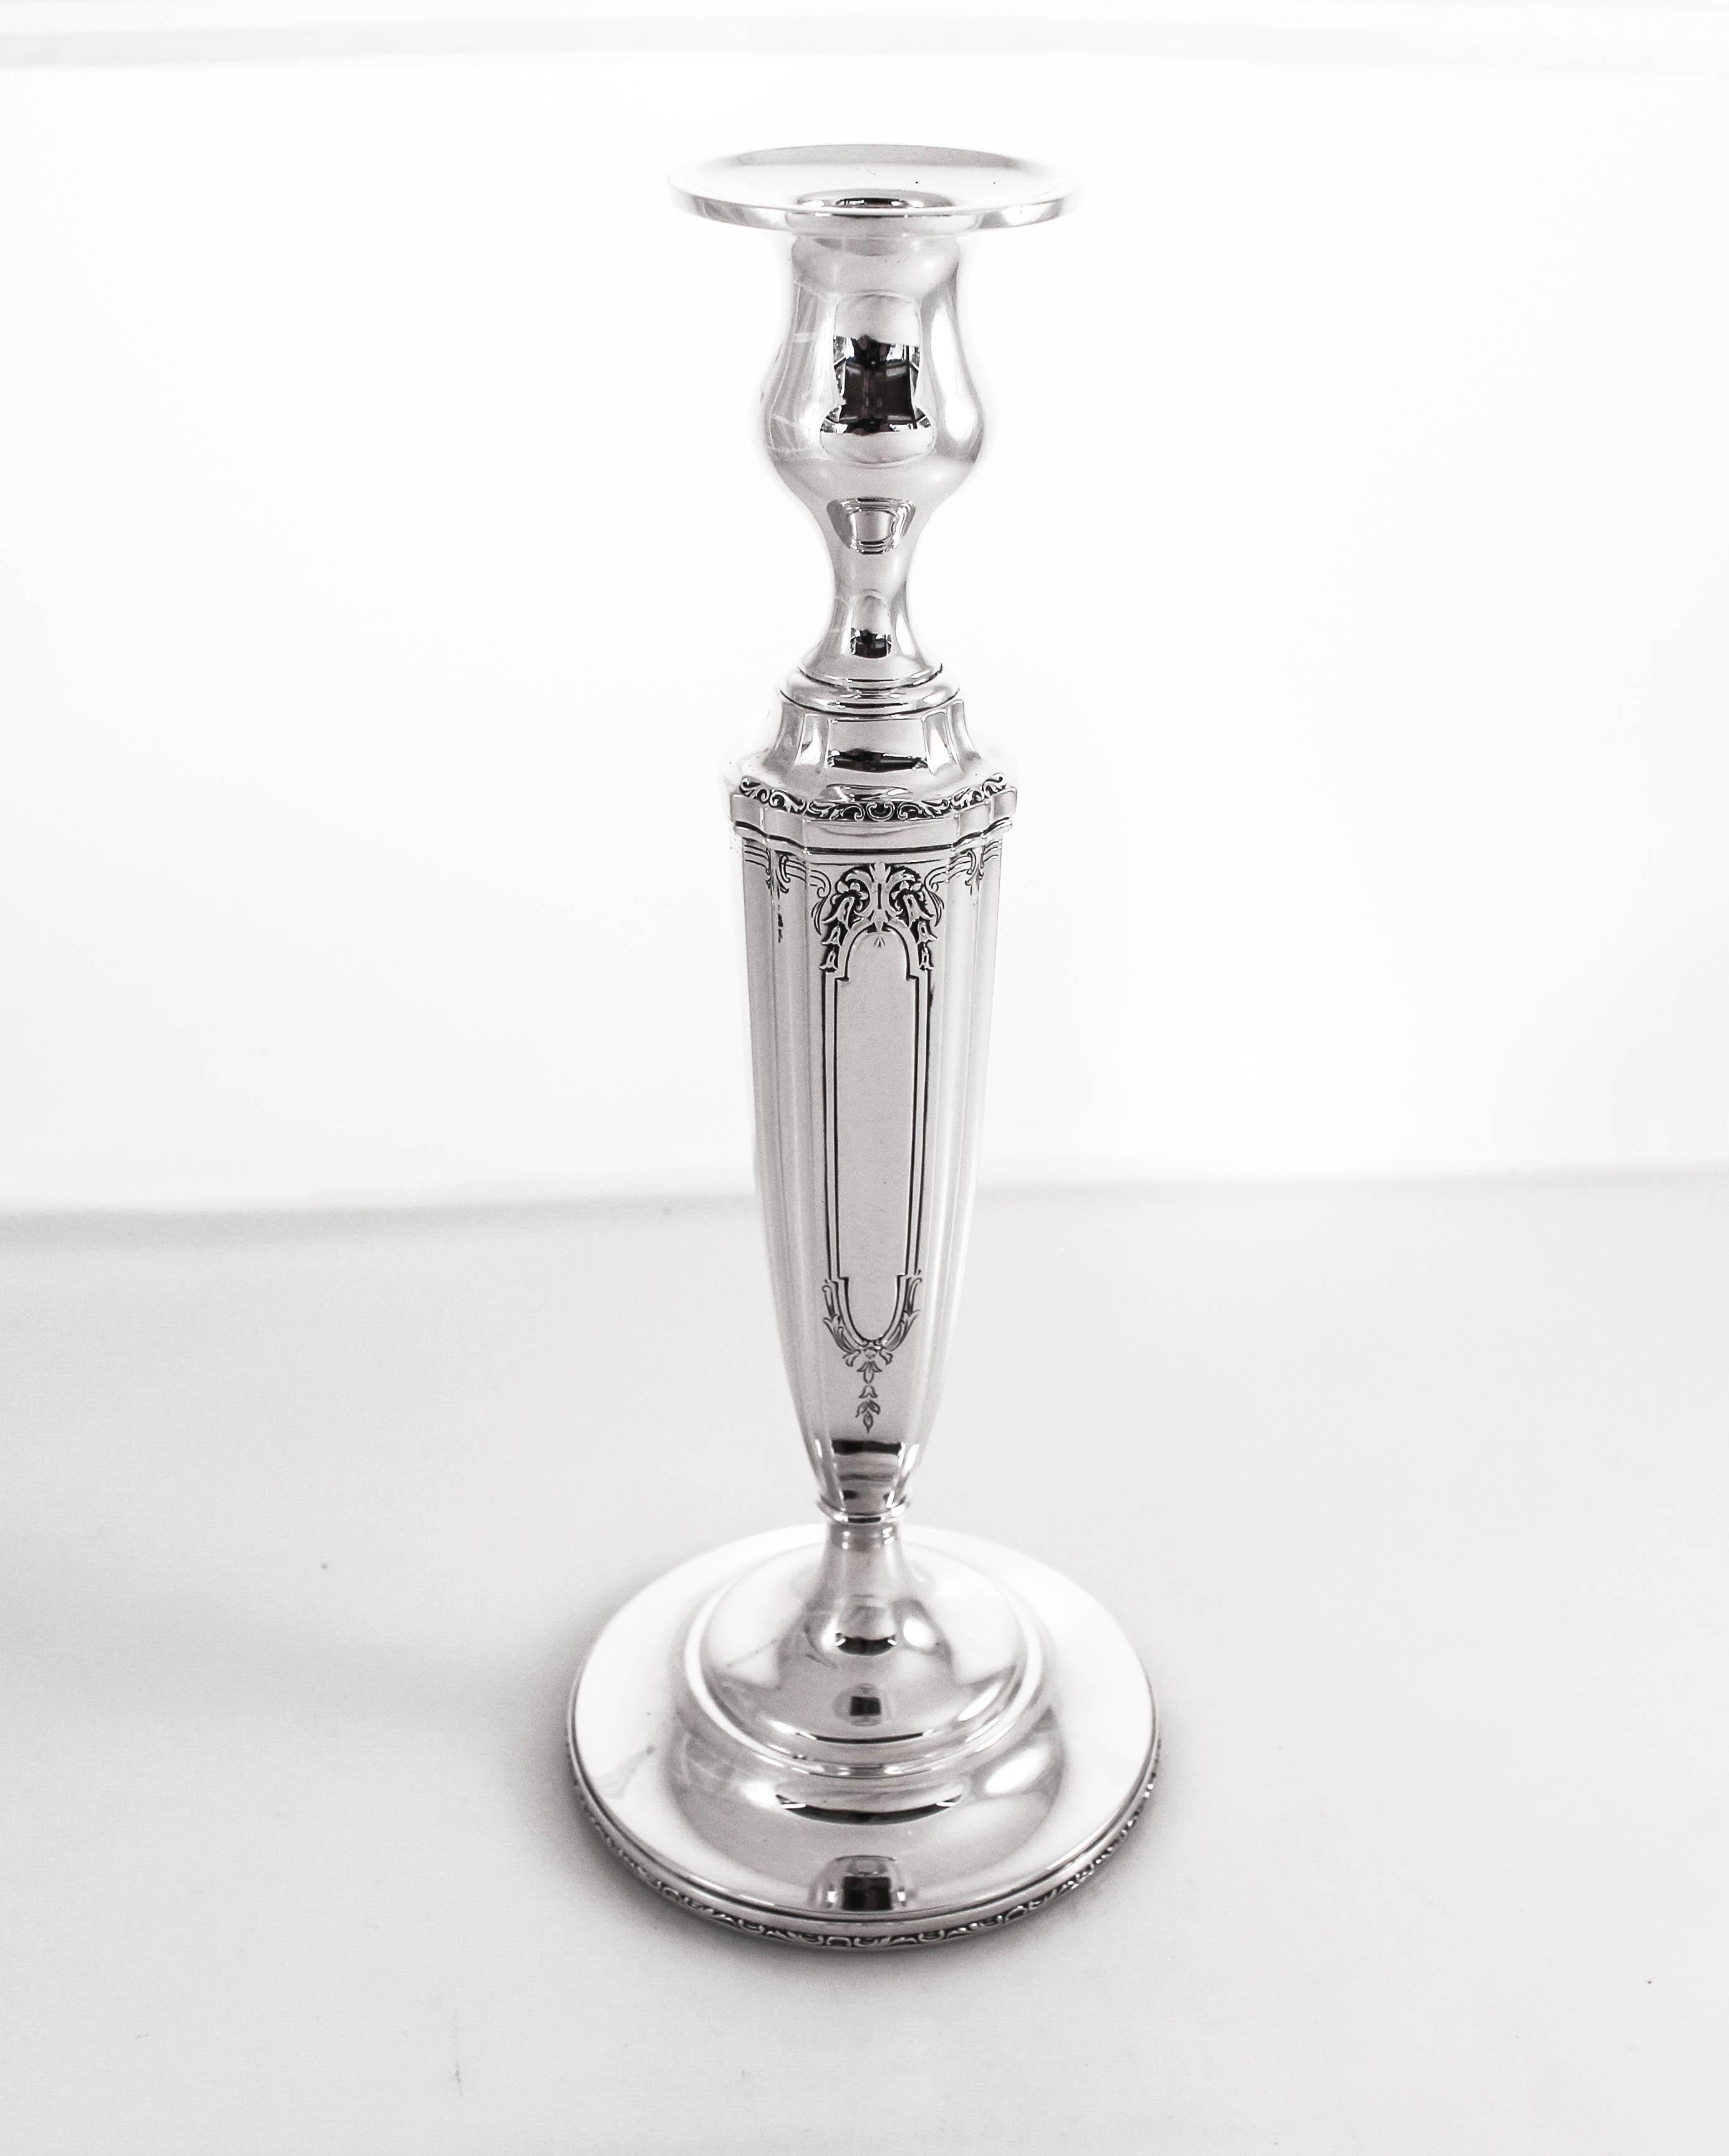 Offering a pair of sterling silver candlesticks by Wallace Silversmiths. They are not too ornate and not too plain; just a perfect mix between the two styles. Pretty etched work around the base and the top with a scalloped body. They are tapered and